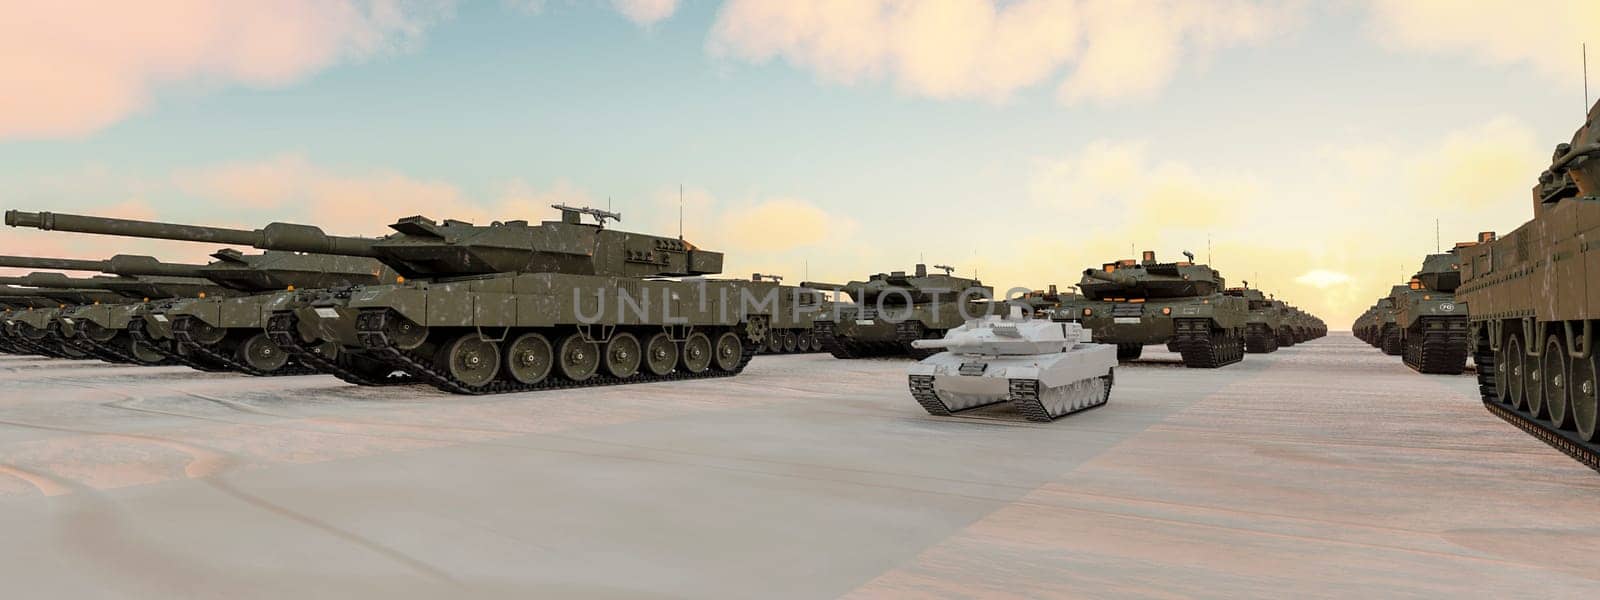 Tanks clad in winter camouflage stand on a snowy expanse, a stark contrast to the warm twilight sky